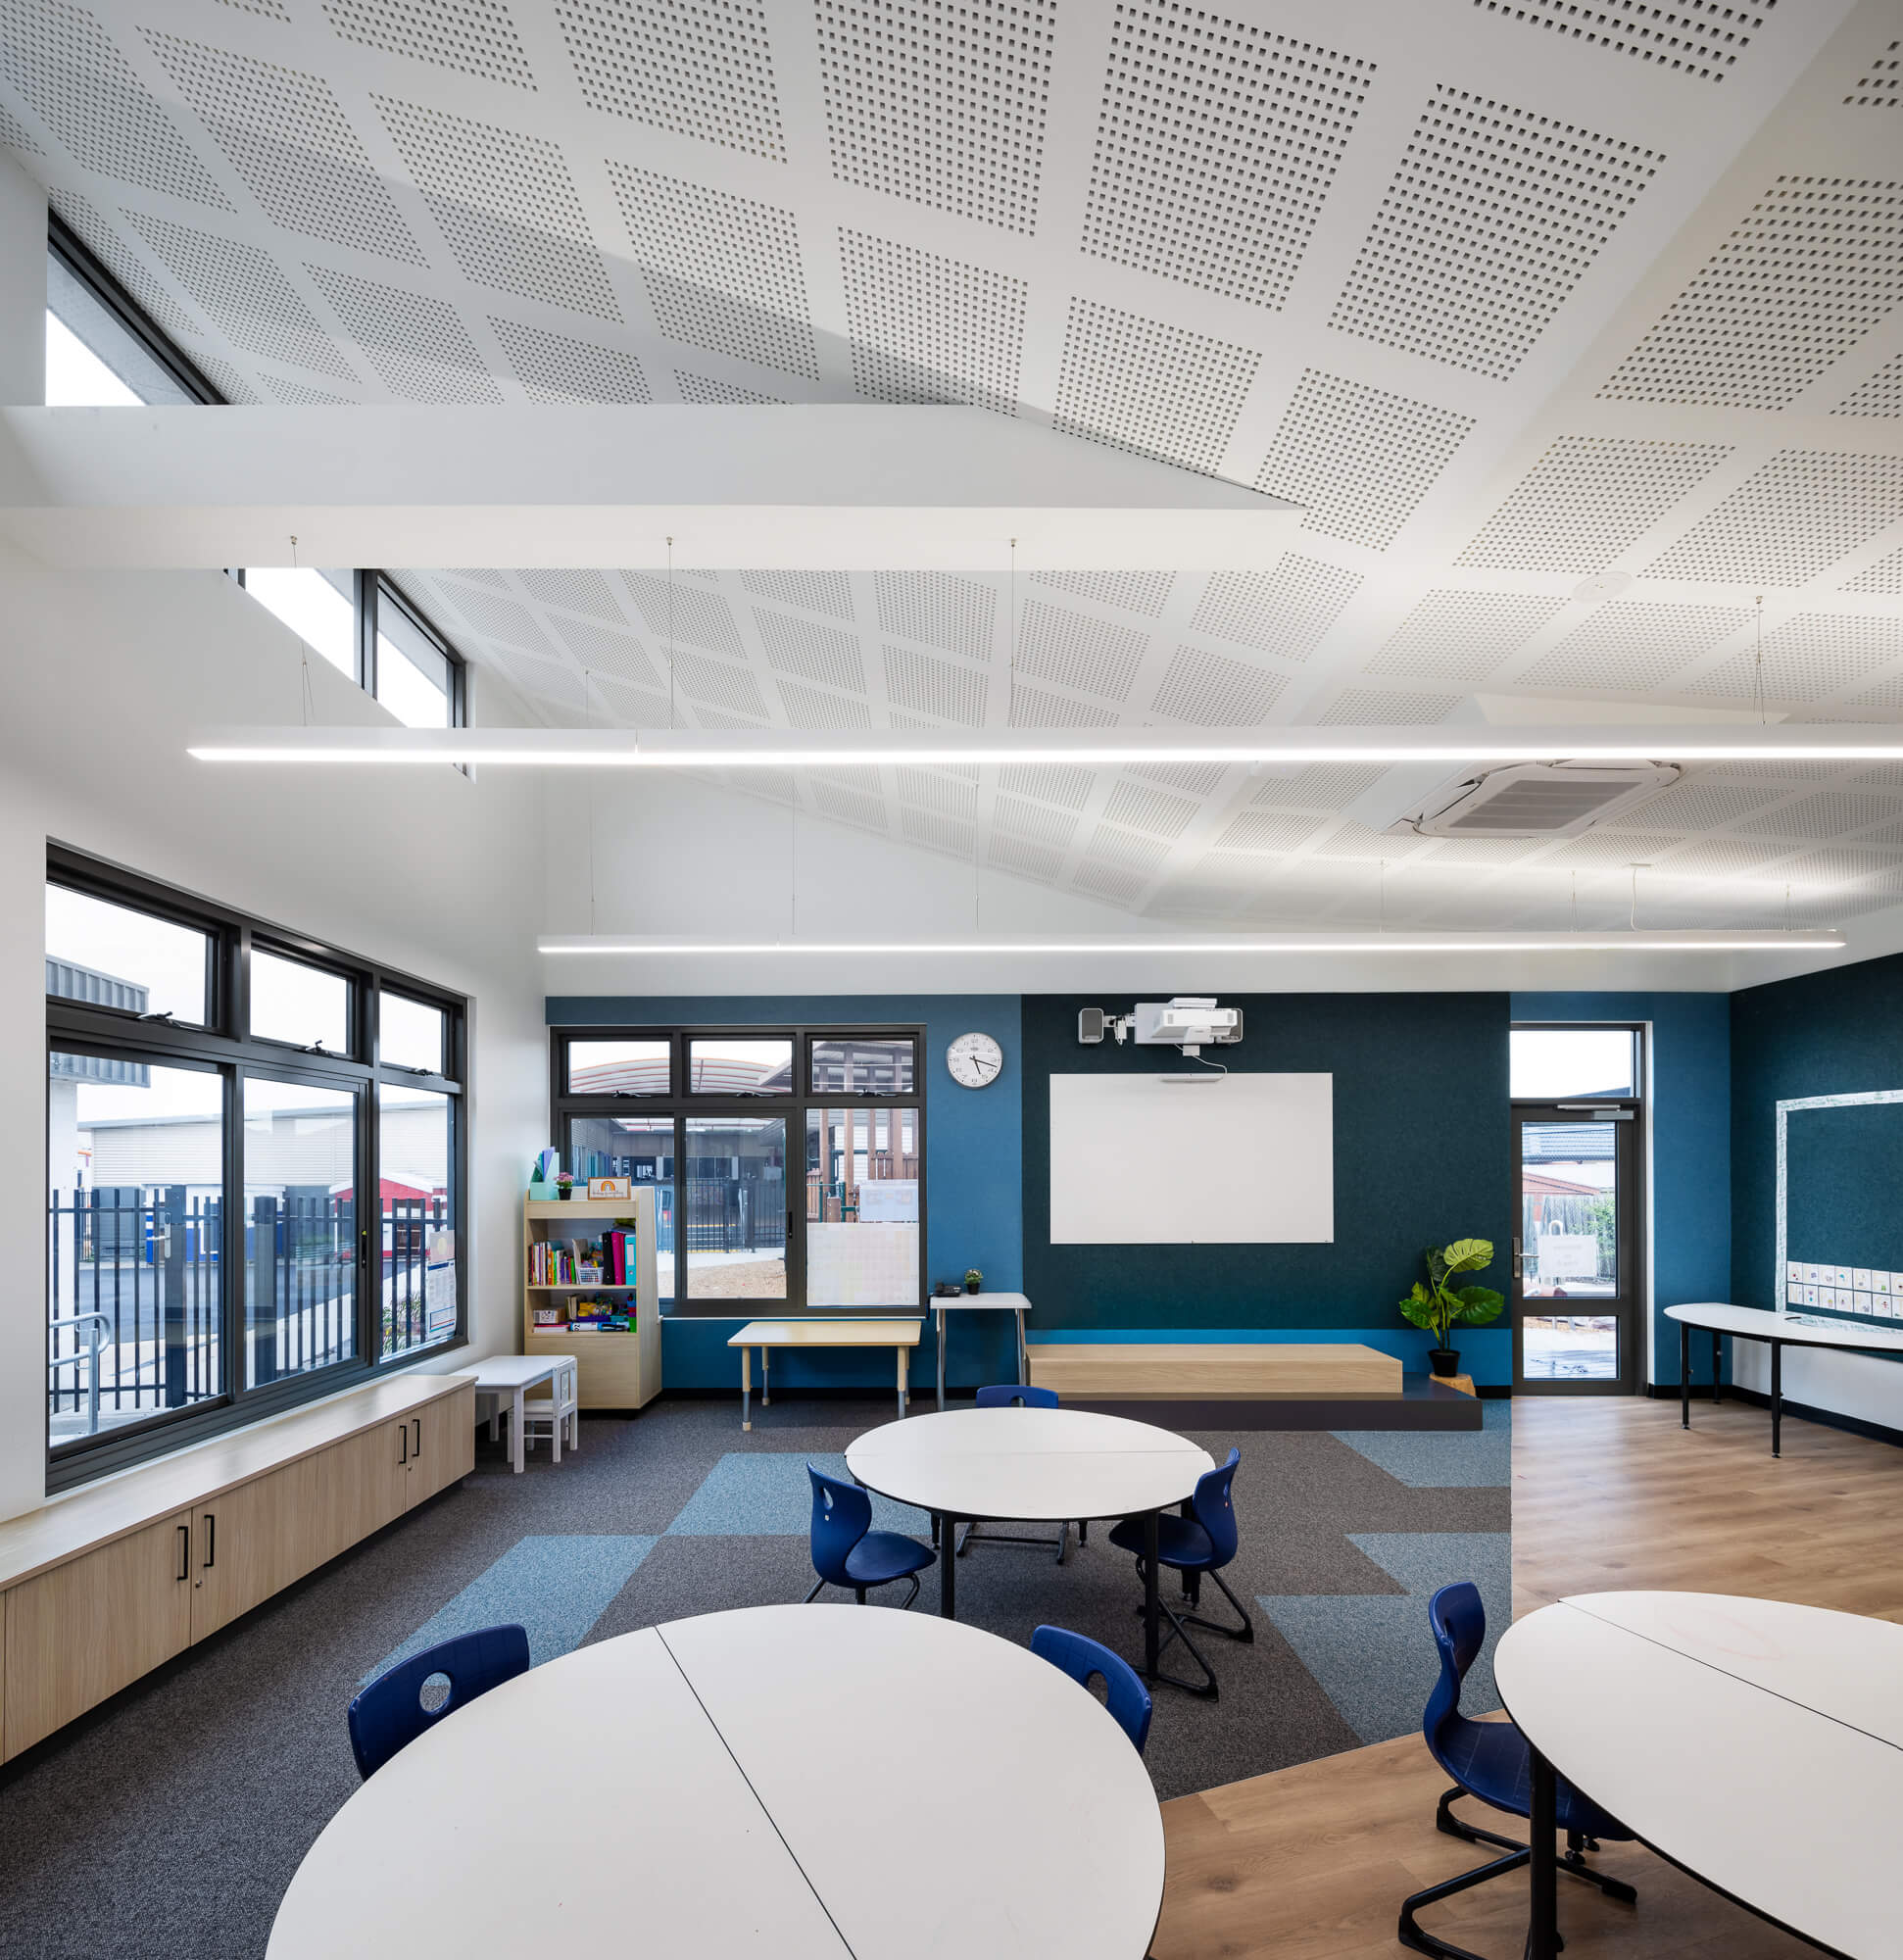 School room with round tables, student-heigh windows and raked white ceiling with perforated acoustic treatment.